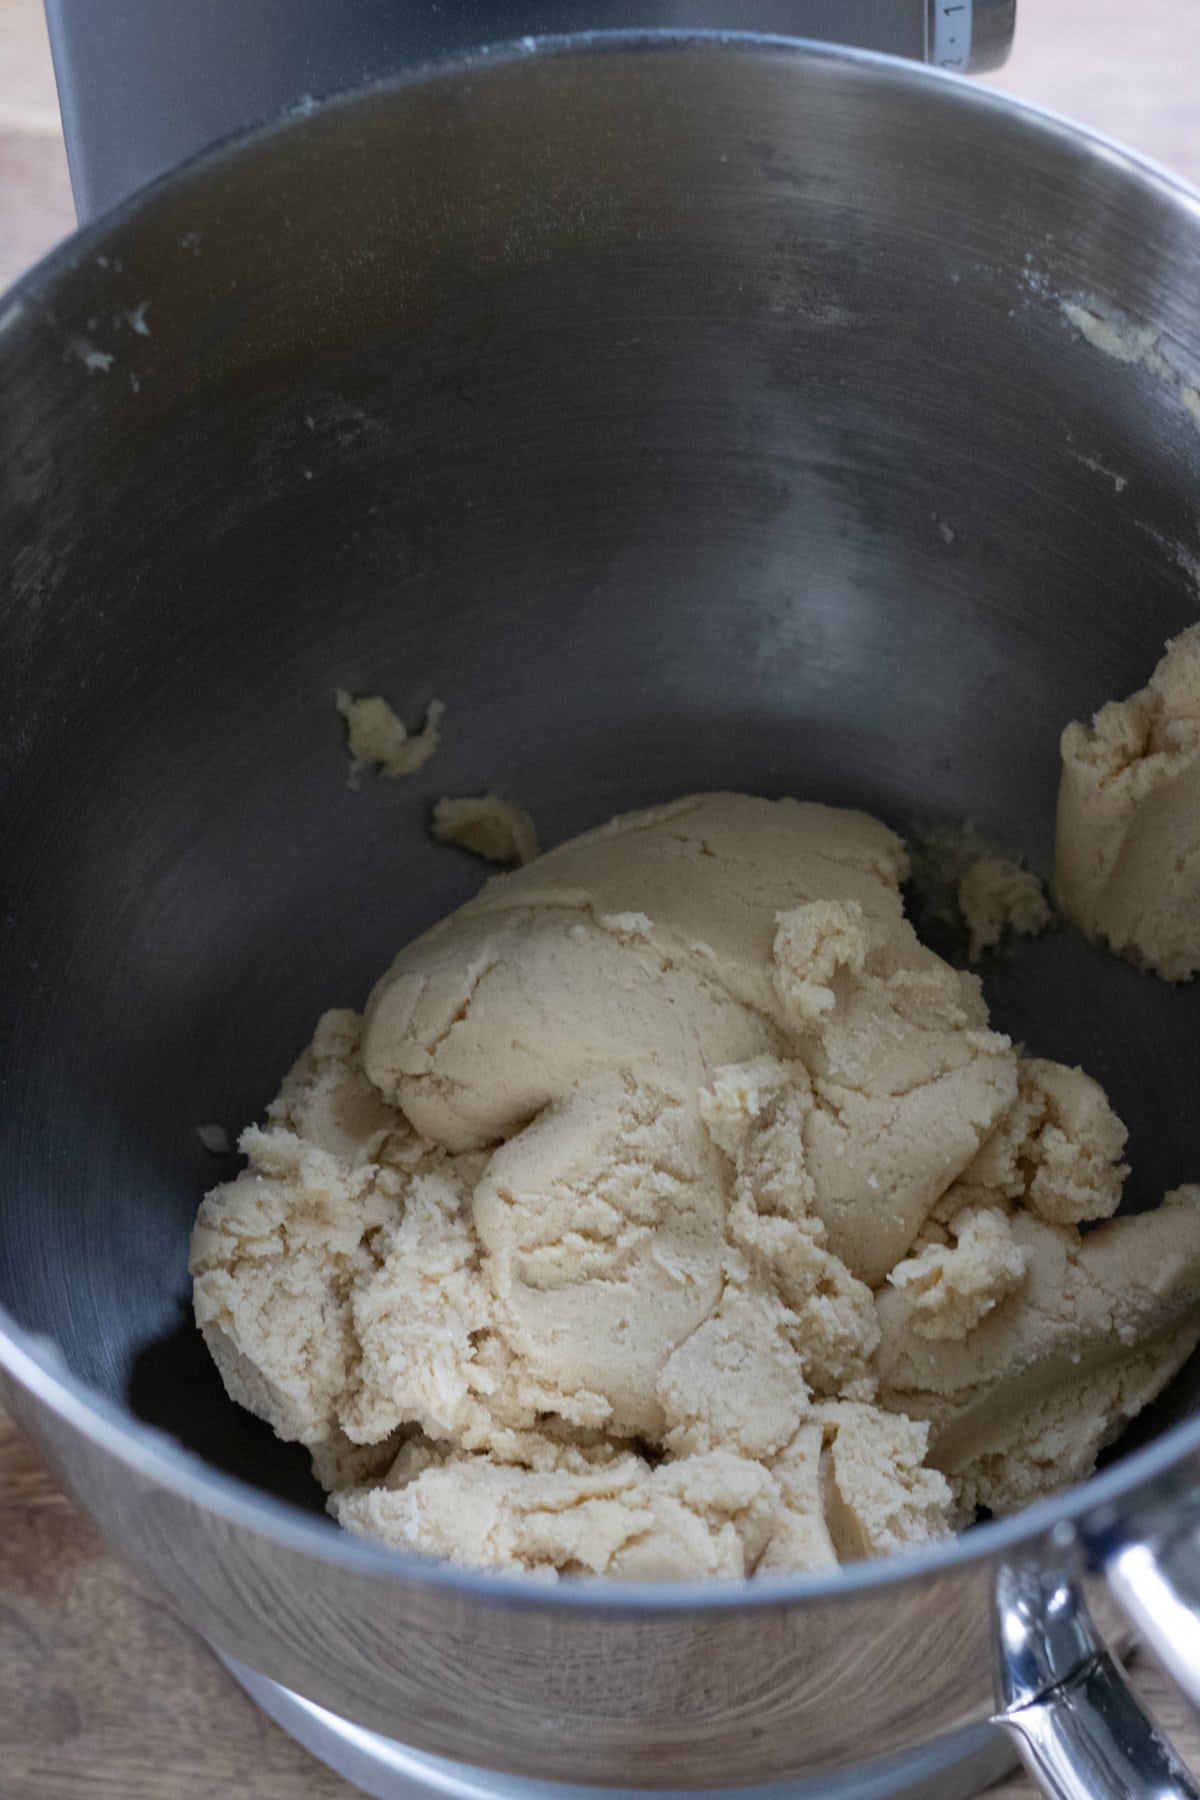 Finished cookie dough in a bowl.